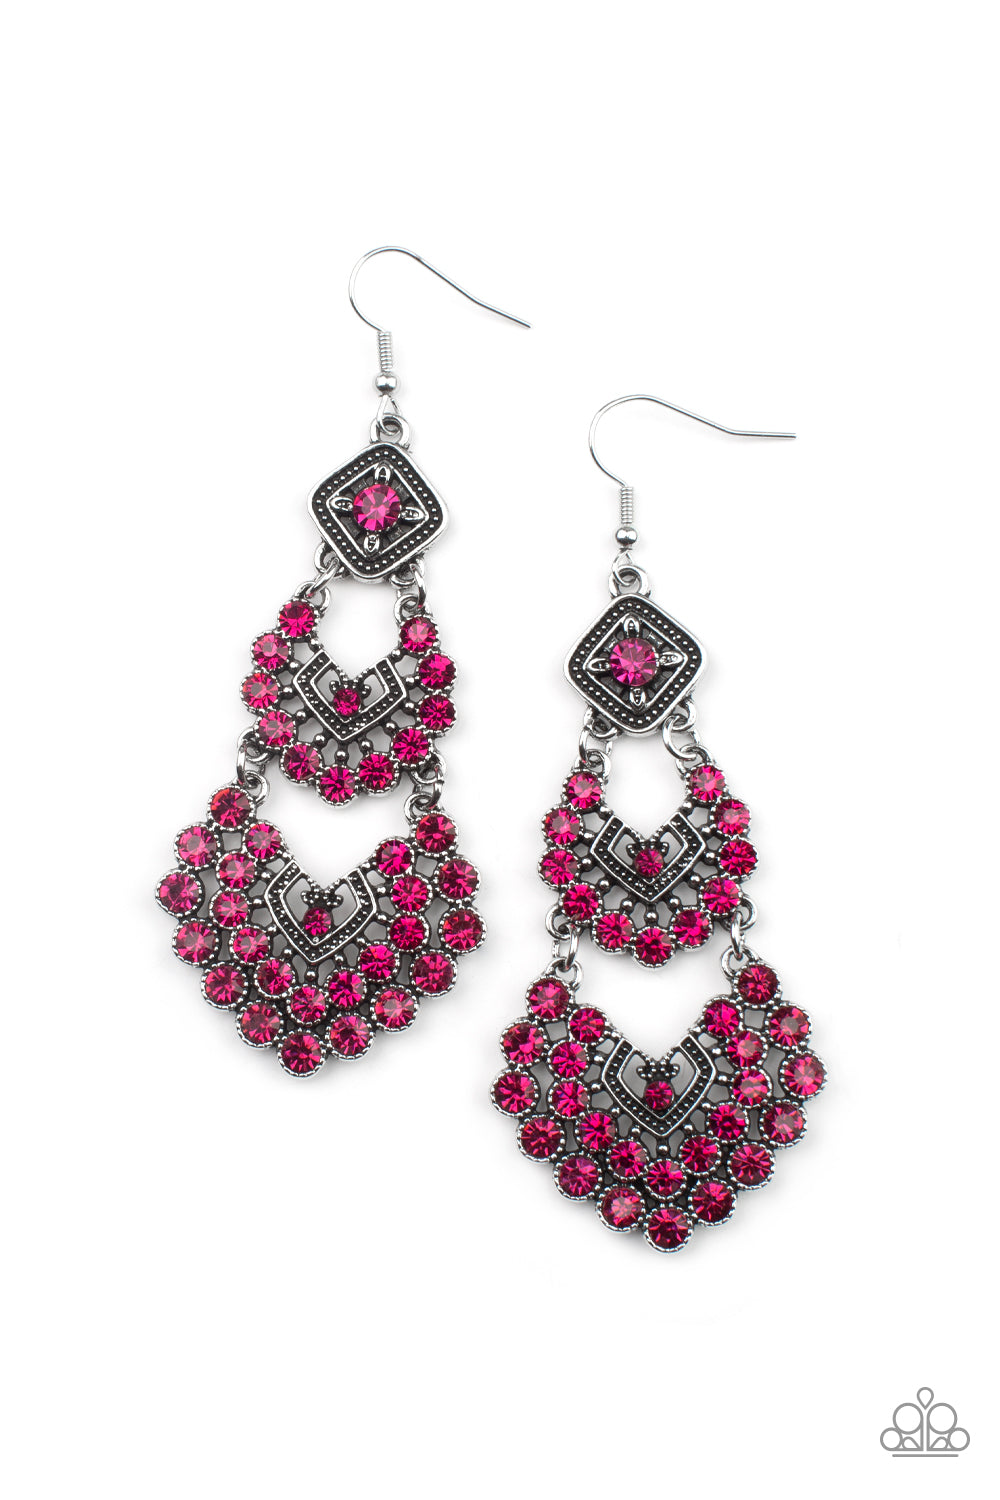 All For The GLAM - Pink Earring freeshipping - JewLz4u Gemstone Gallery